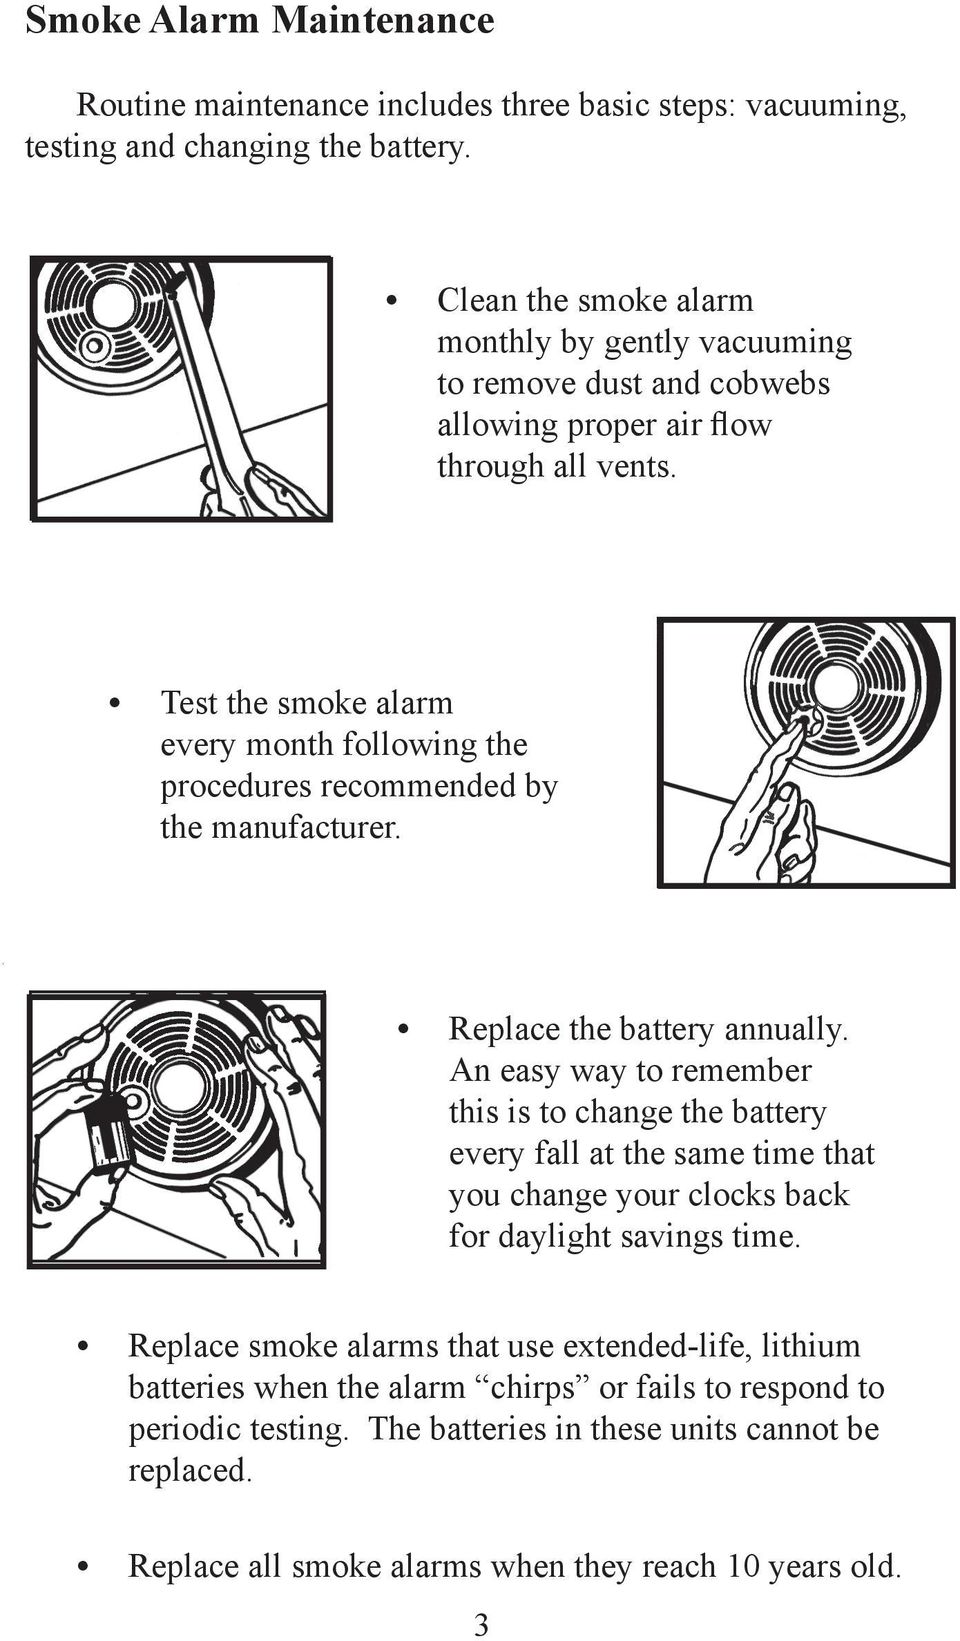 Test the smoke alarm every month following the procedures recommended by the manufacturer. Replace the battery annually.